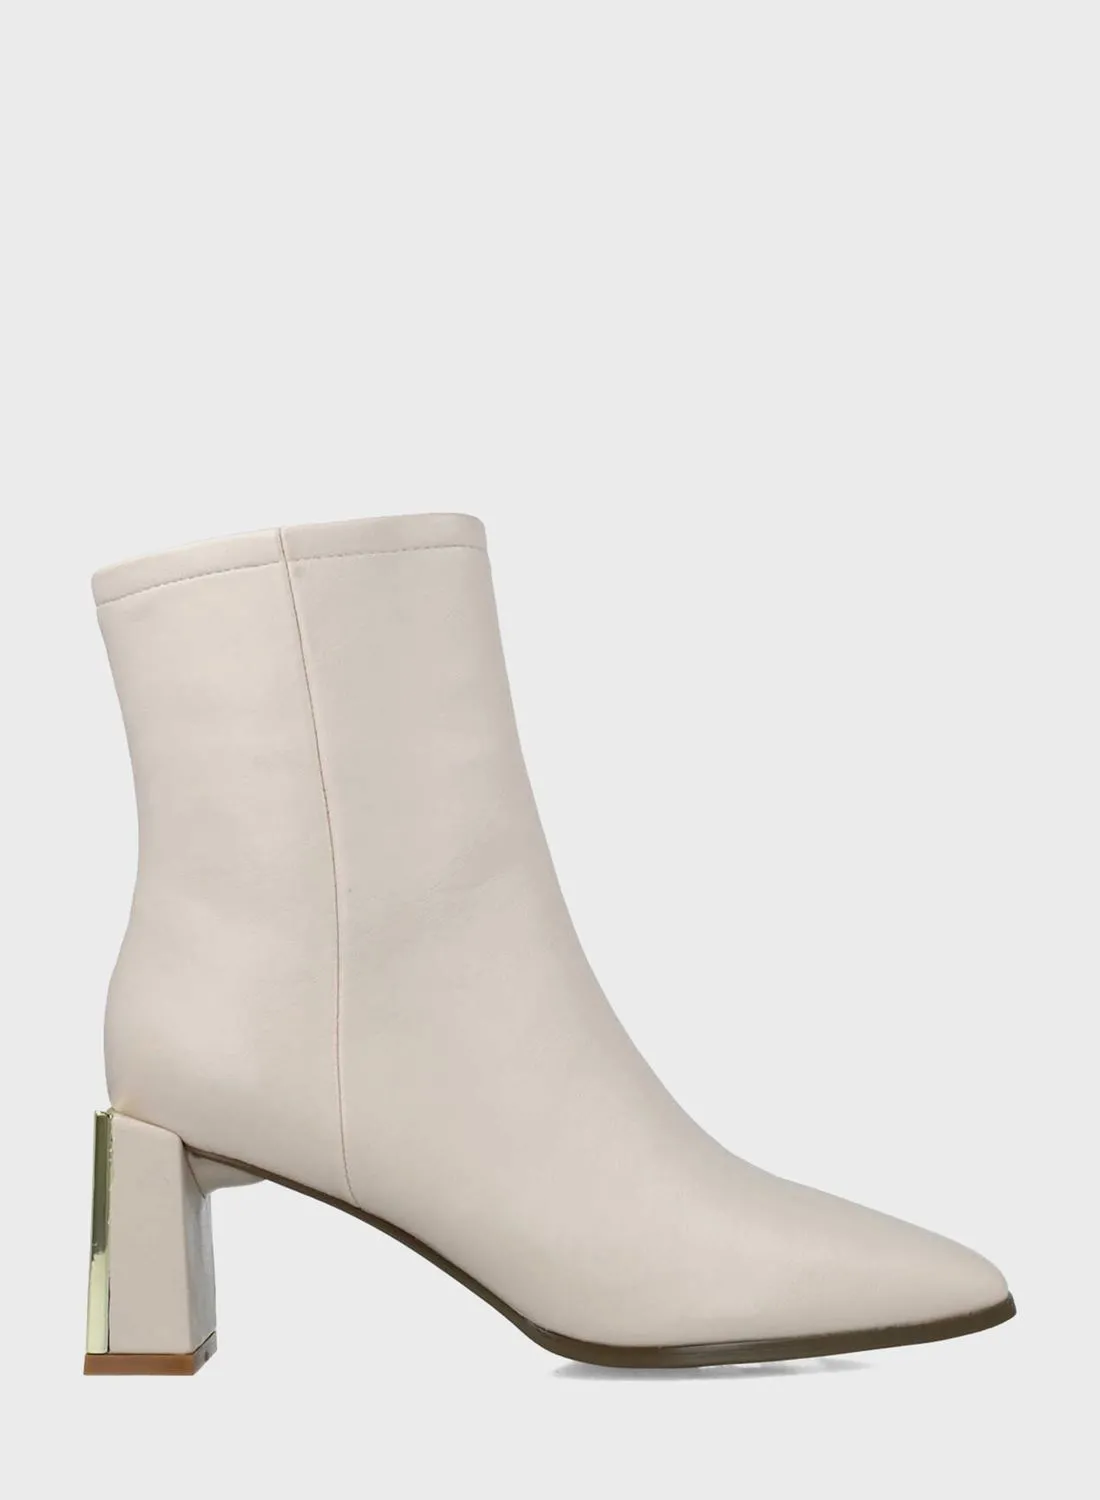 MENBUR Pointed Toe Ankle Boots